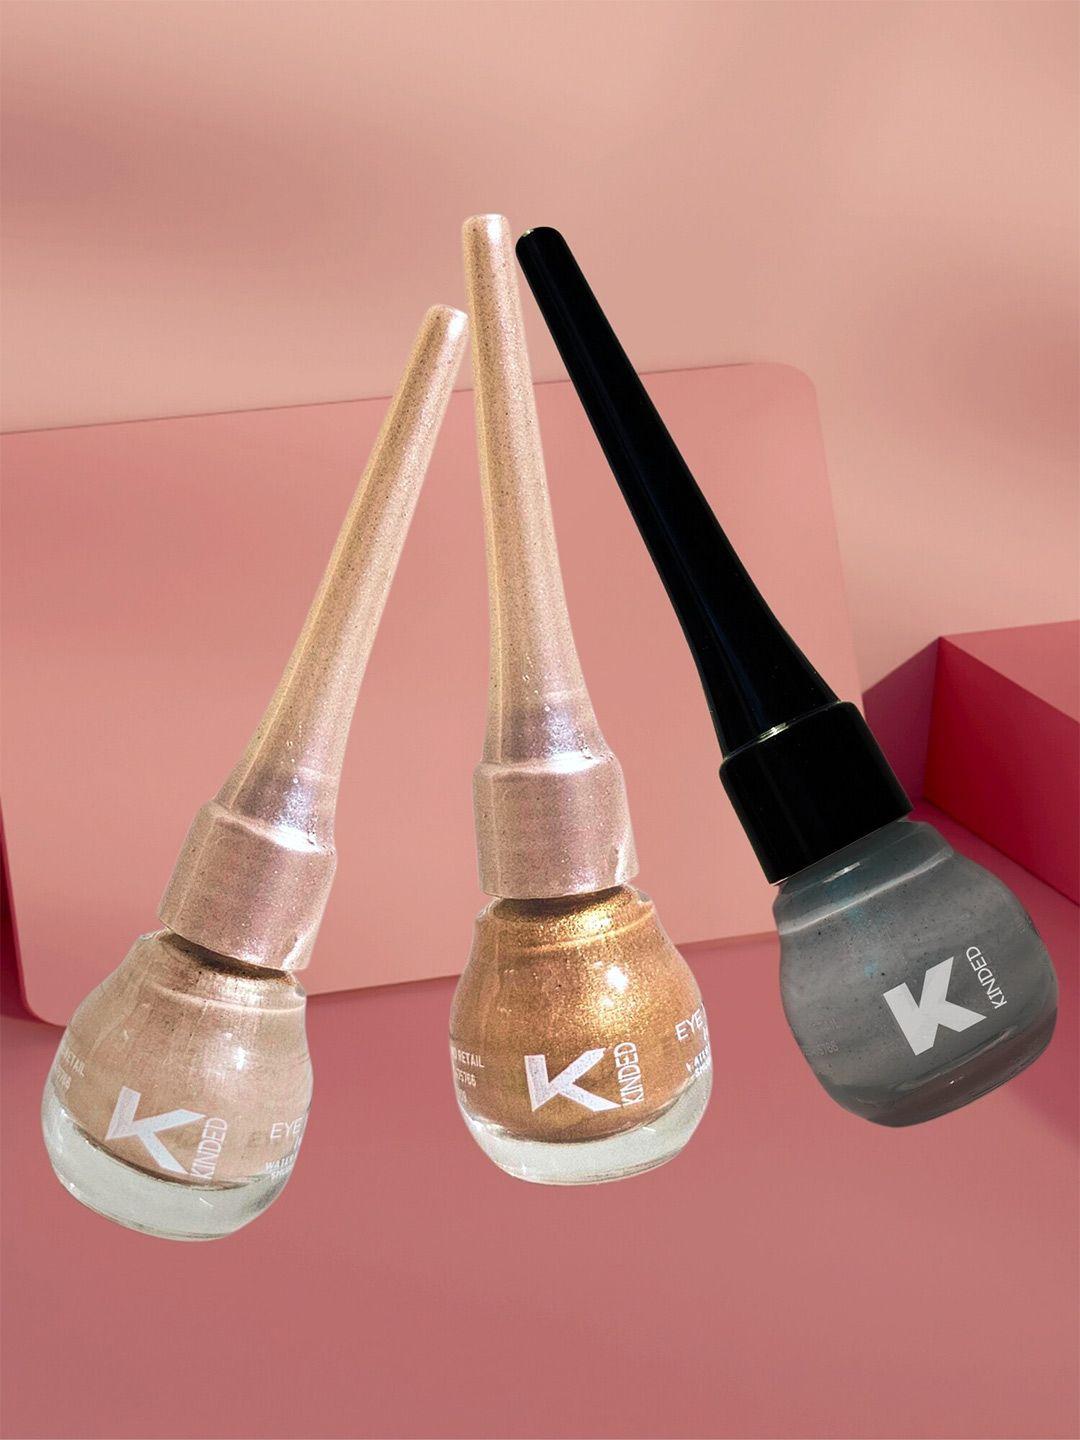 kinded 3-pcs long lasting eye liner - 5ml each - greyish silver- pink pearl & cool copper